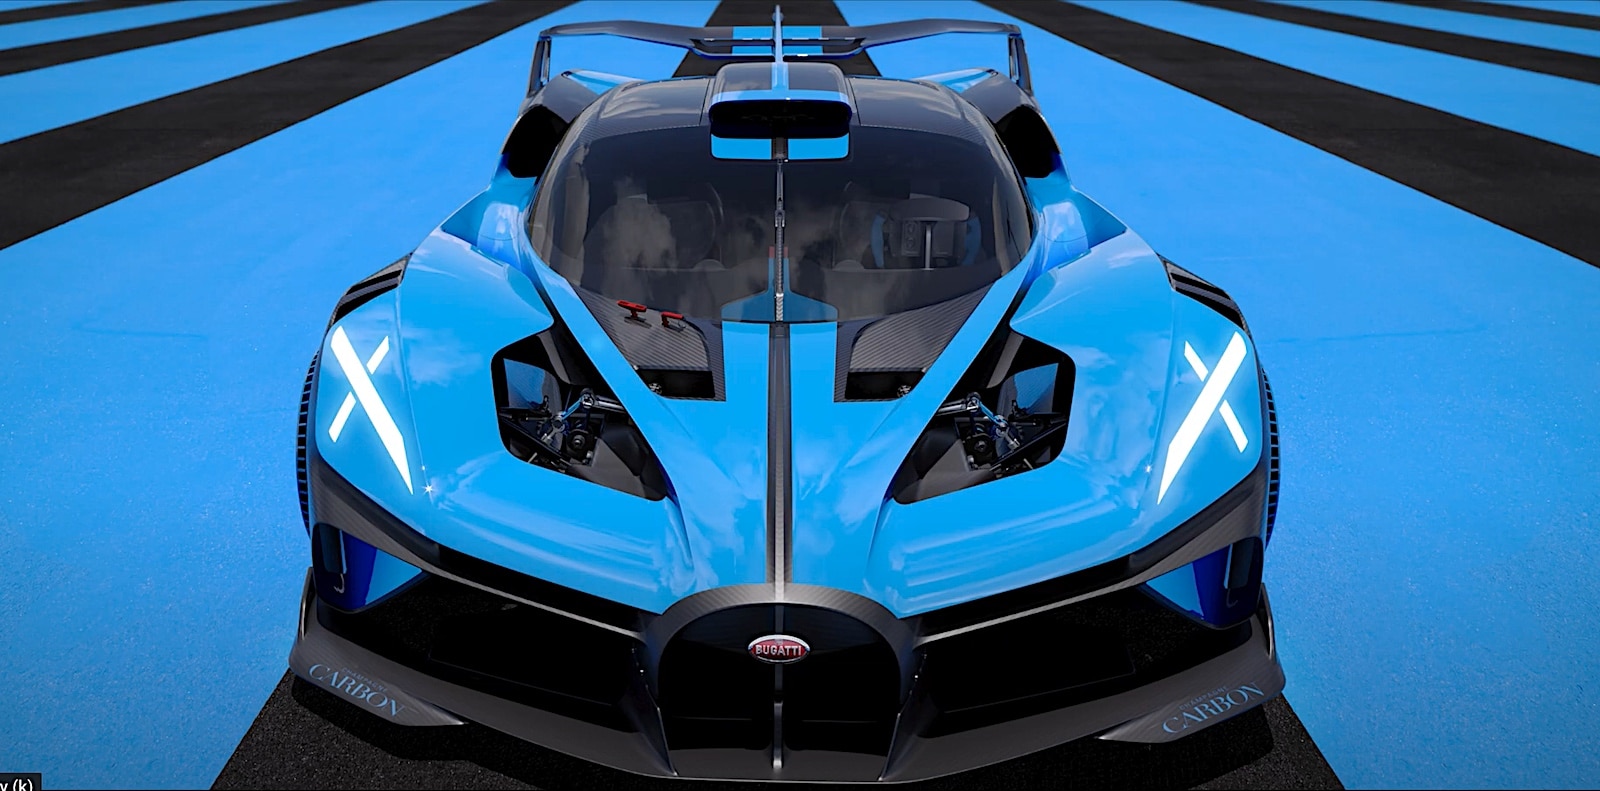 Bugatti Bolide Could Be French Marque’s Next Hypercar - The Detroit Bureau